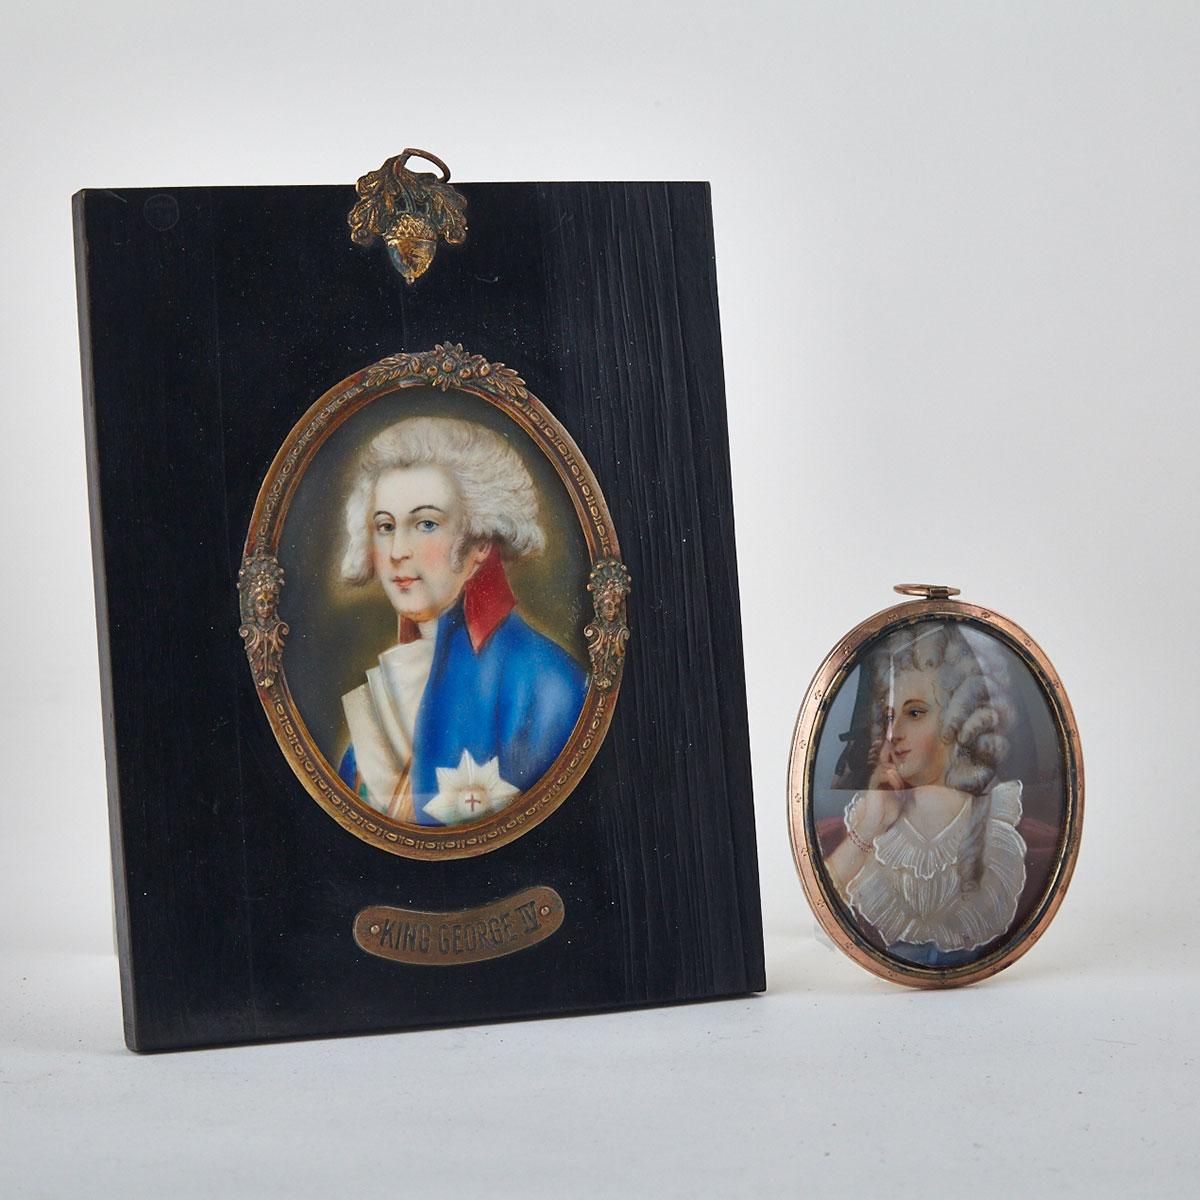 Two English School Portrait Miniatures on Ivory of King George IV and Maria Fitzherbert, 19th century